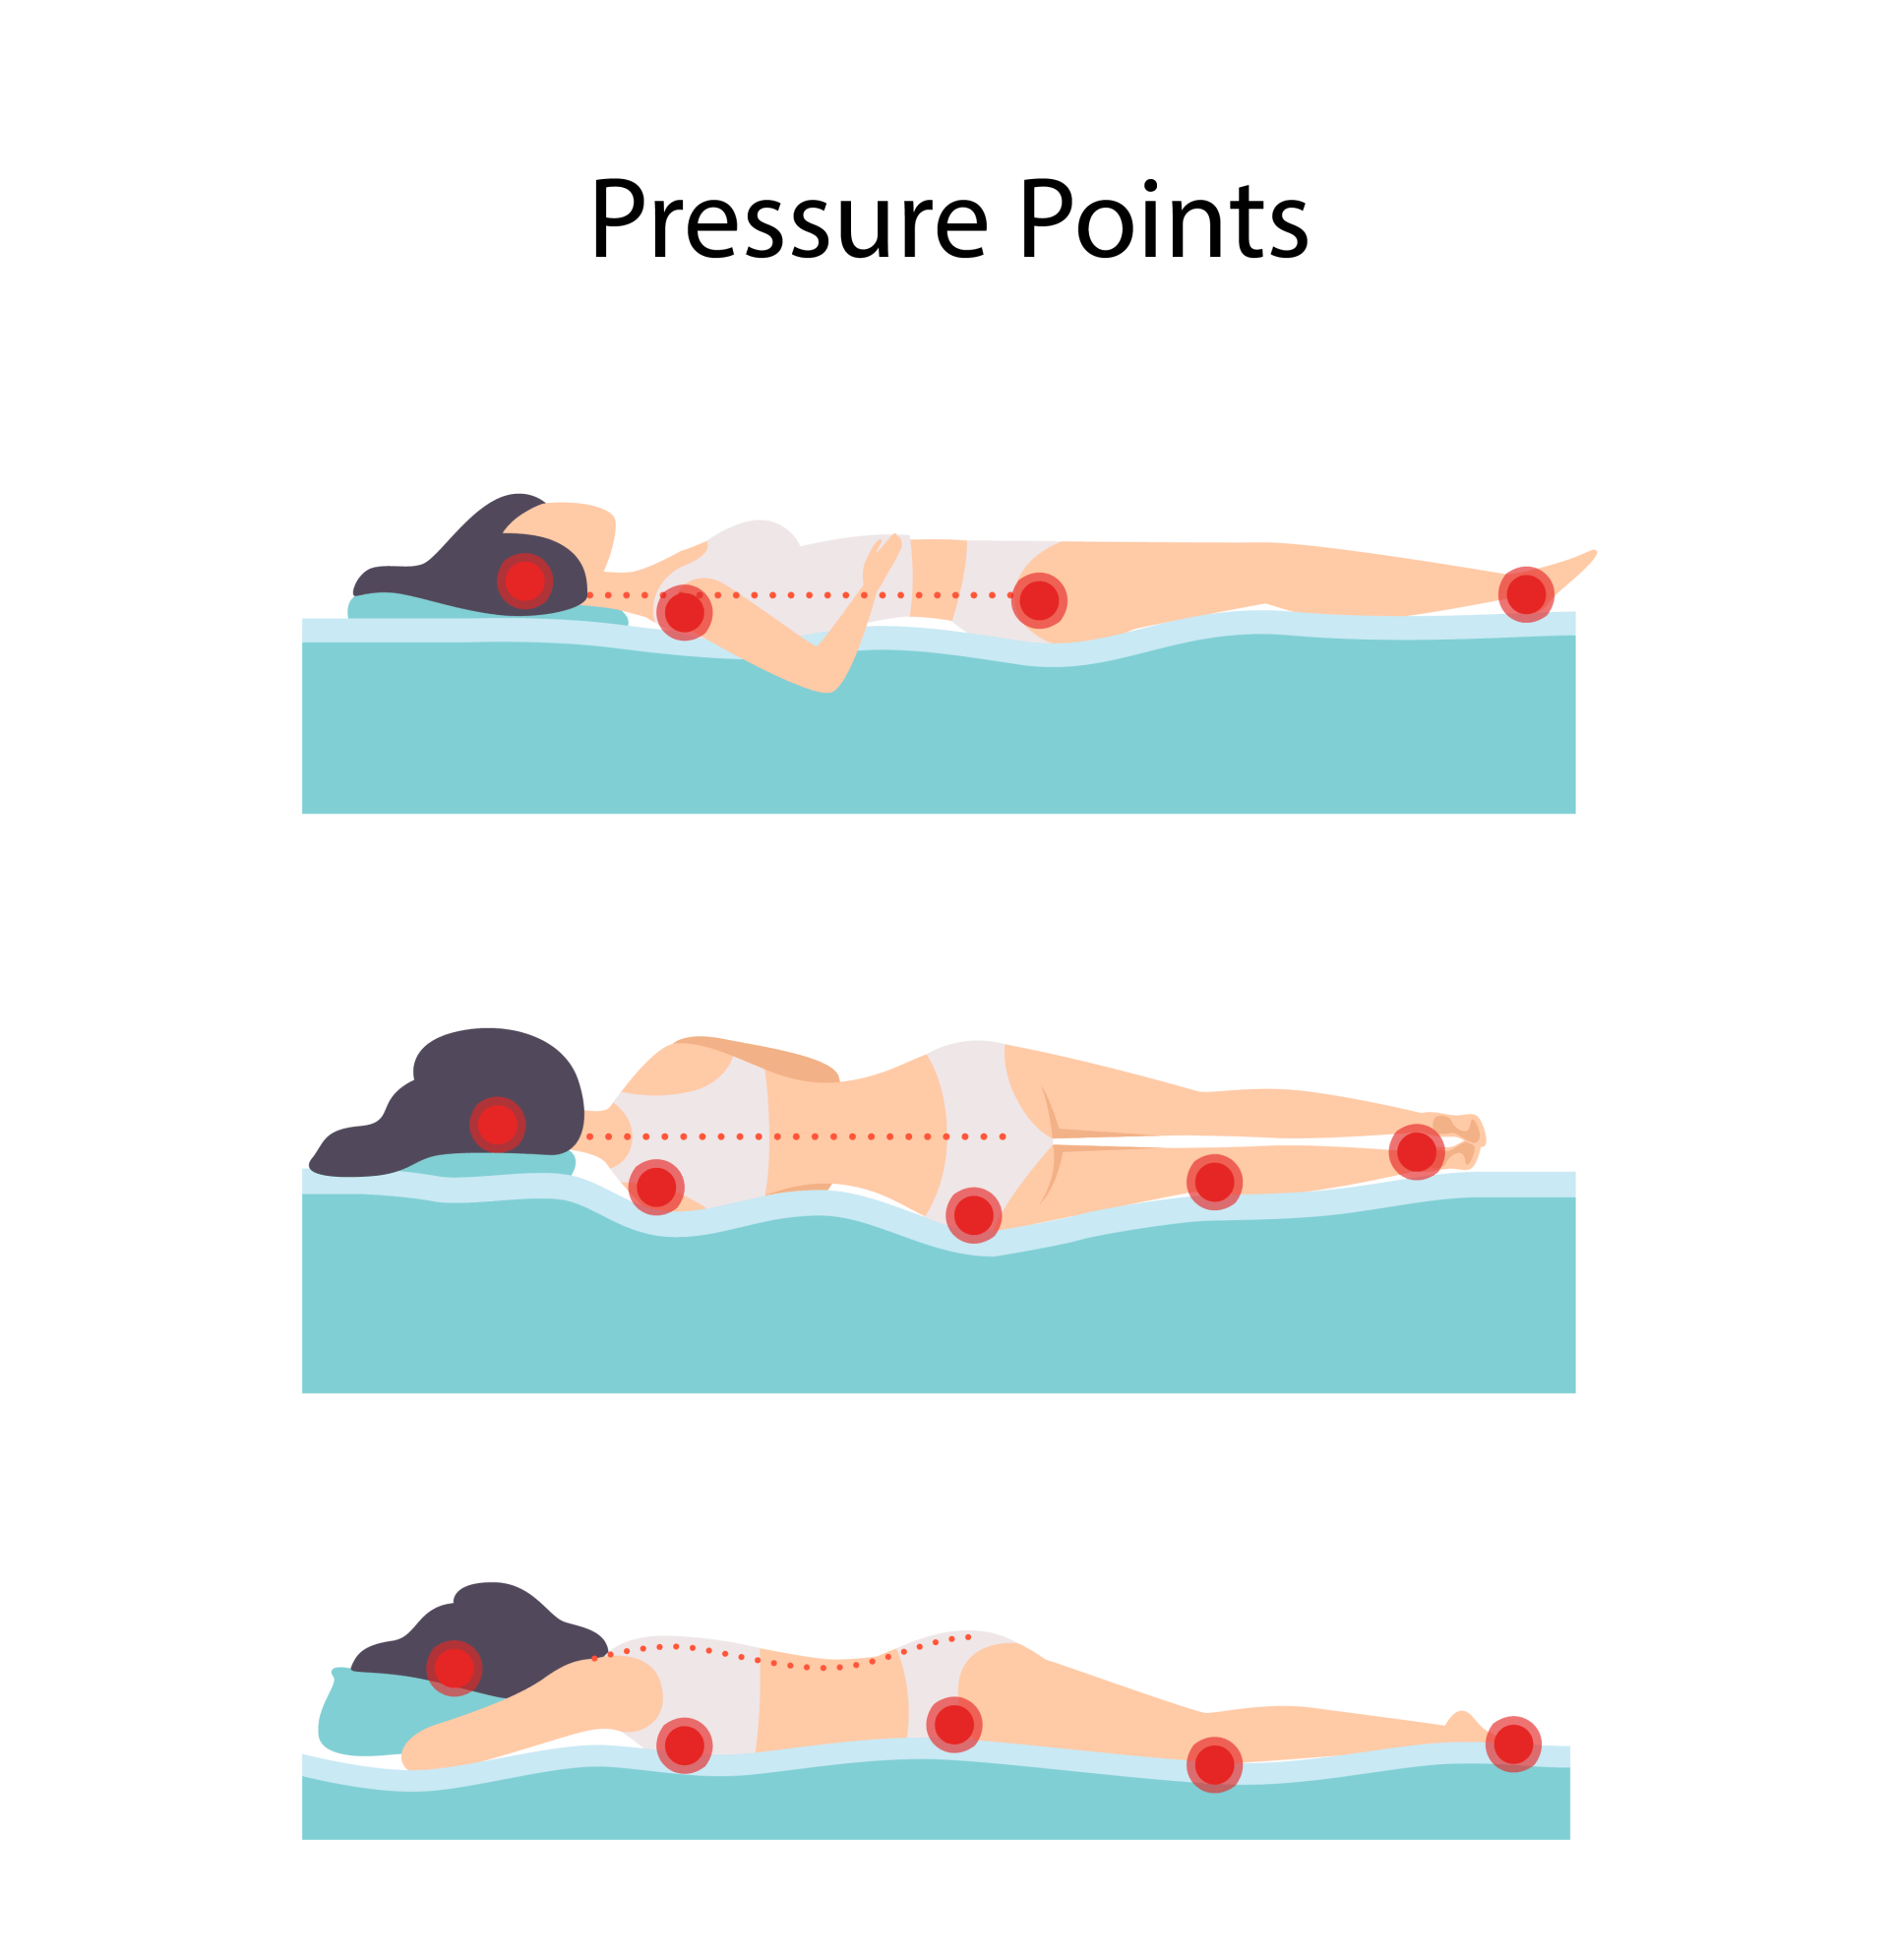 Pressure points on the human body